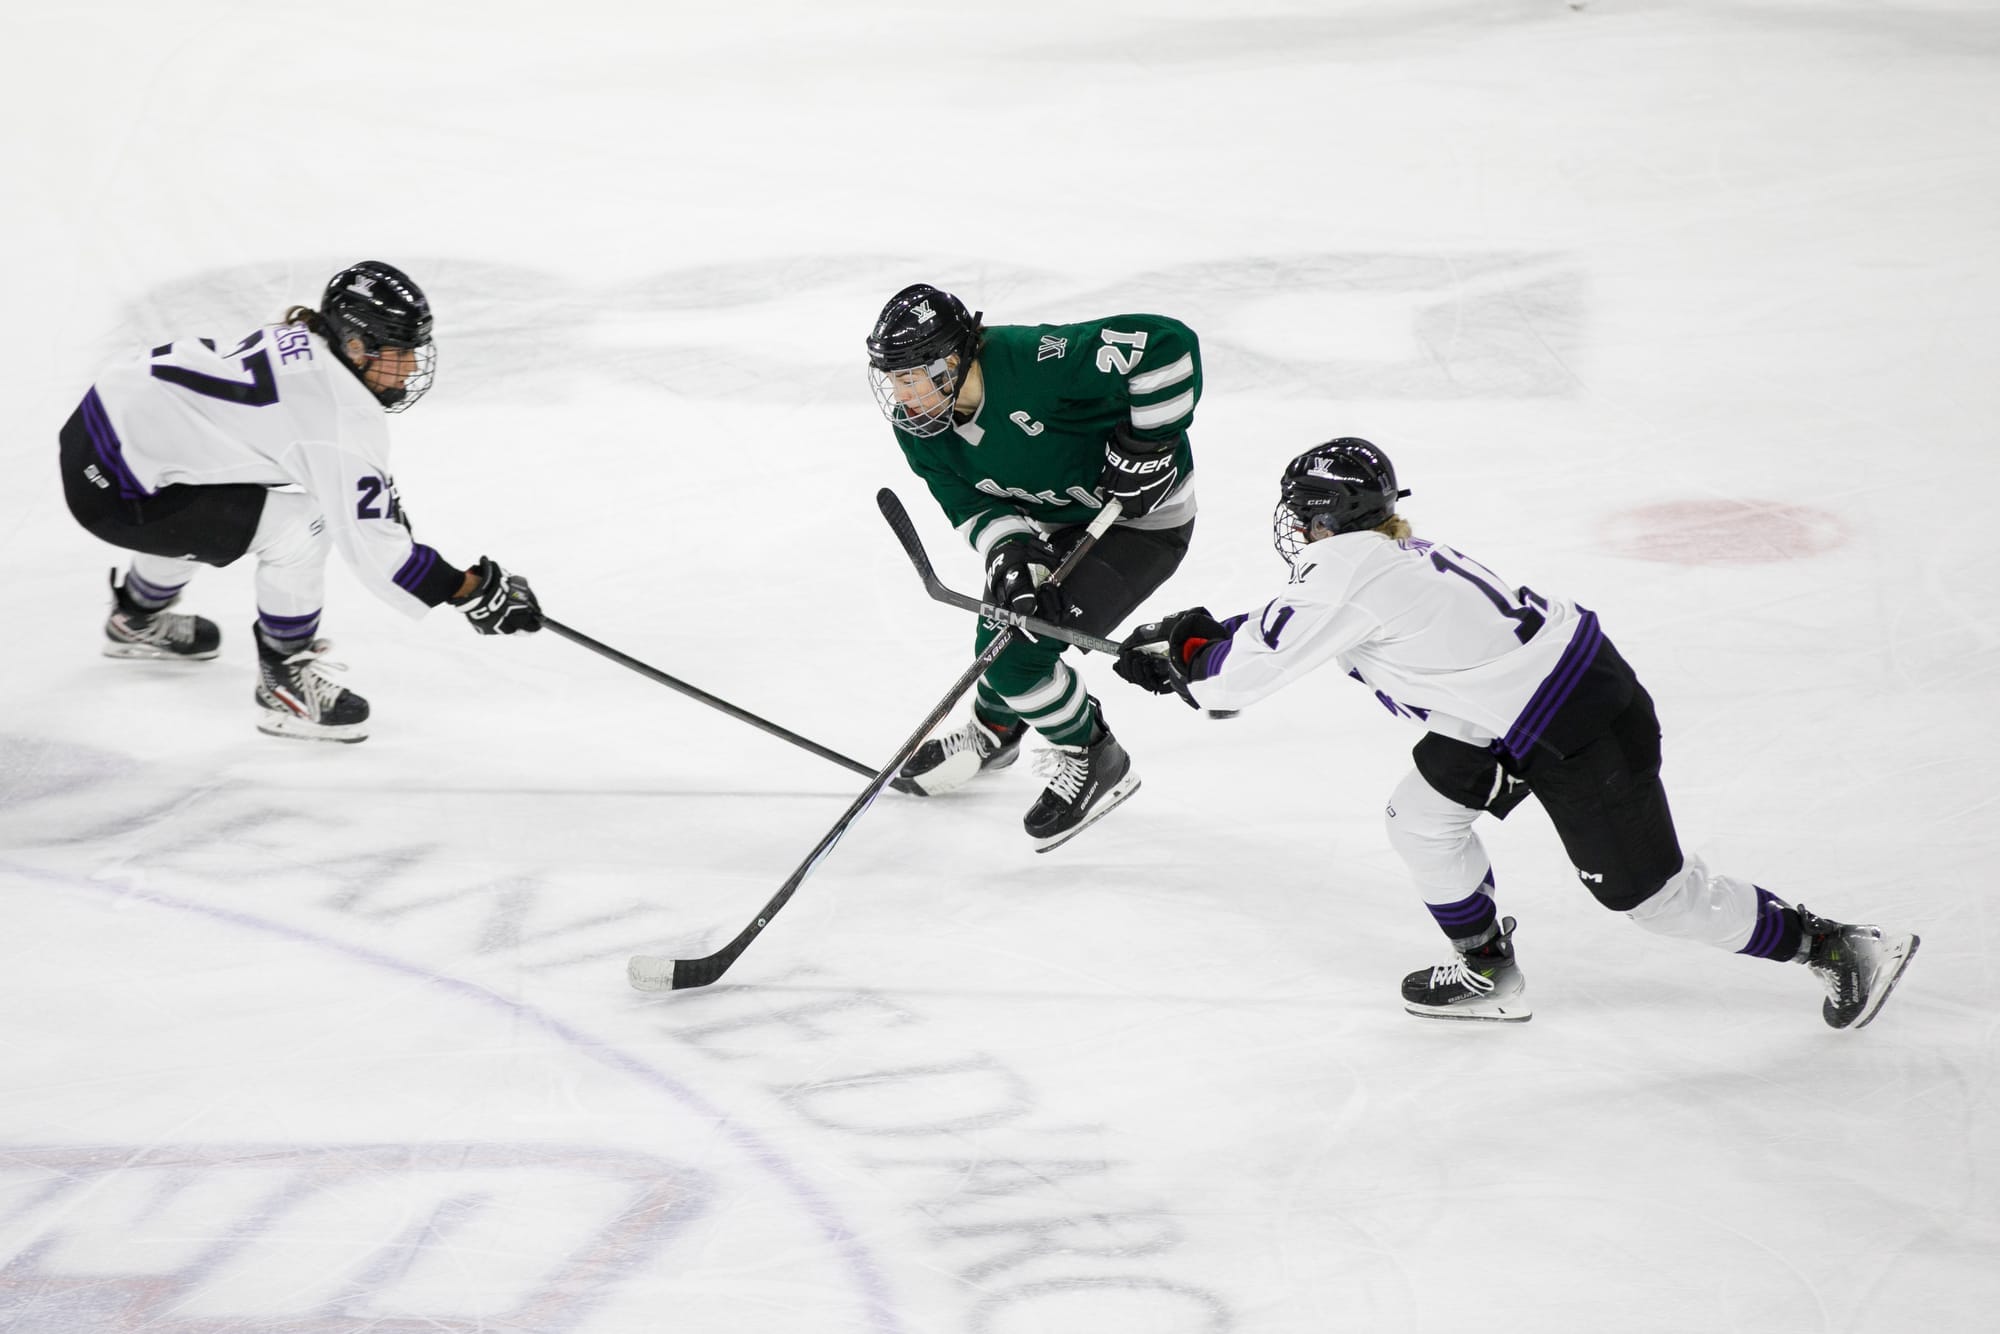 Hilary Knight skates the puck through Taylor Heise and Sophia Kunin. Knight is wearing a green home uniform, while Heise and Kunin and are in white away uniforms.